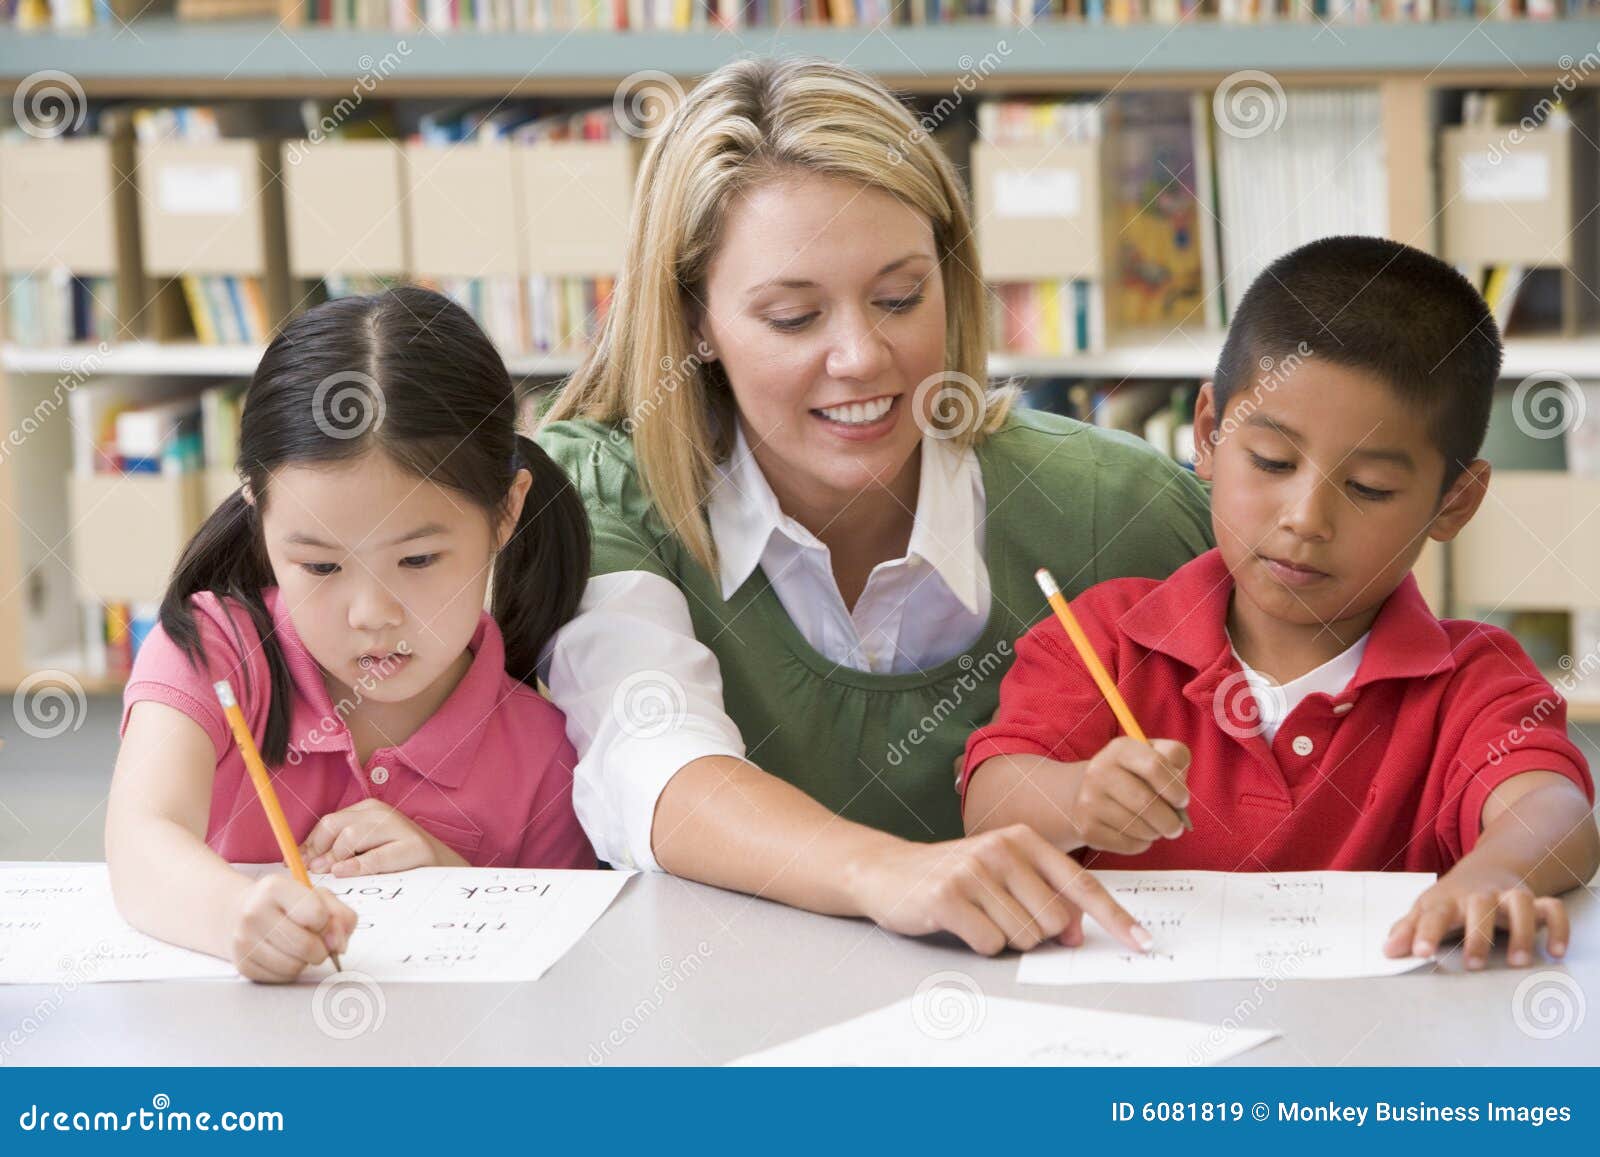 Teacher Helping Students With Writing Skills Stock Image